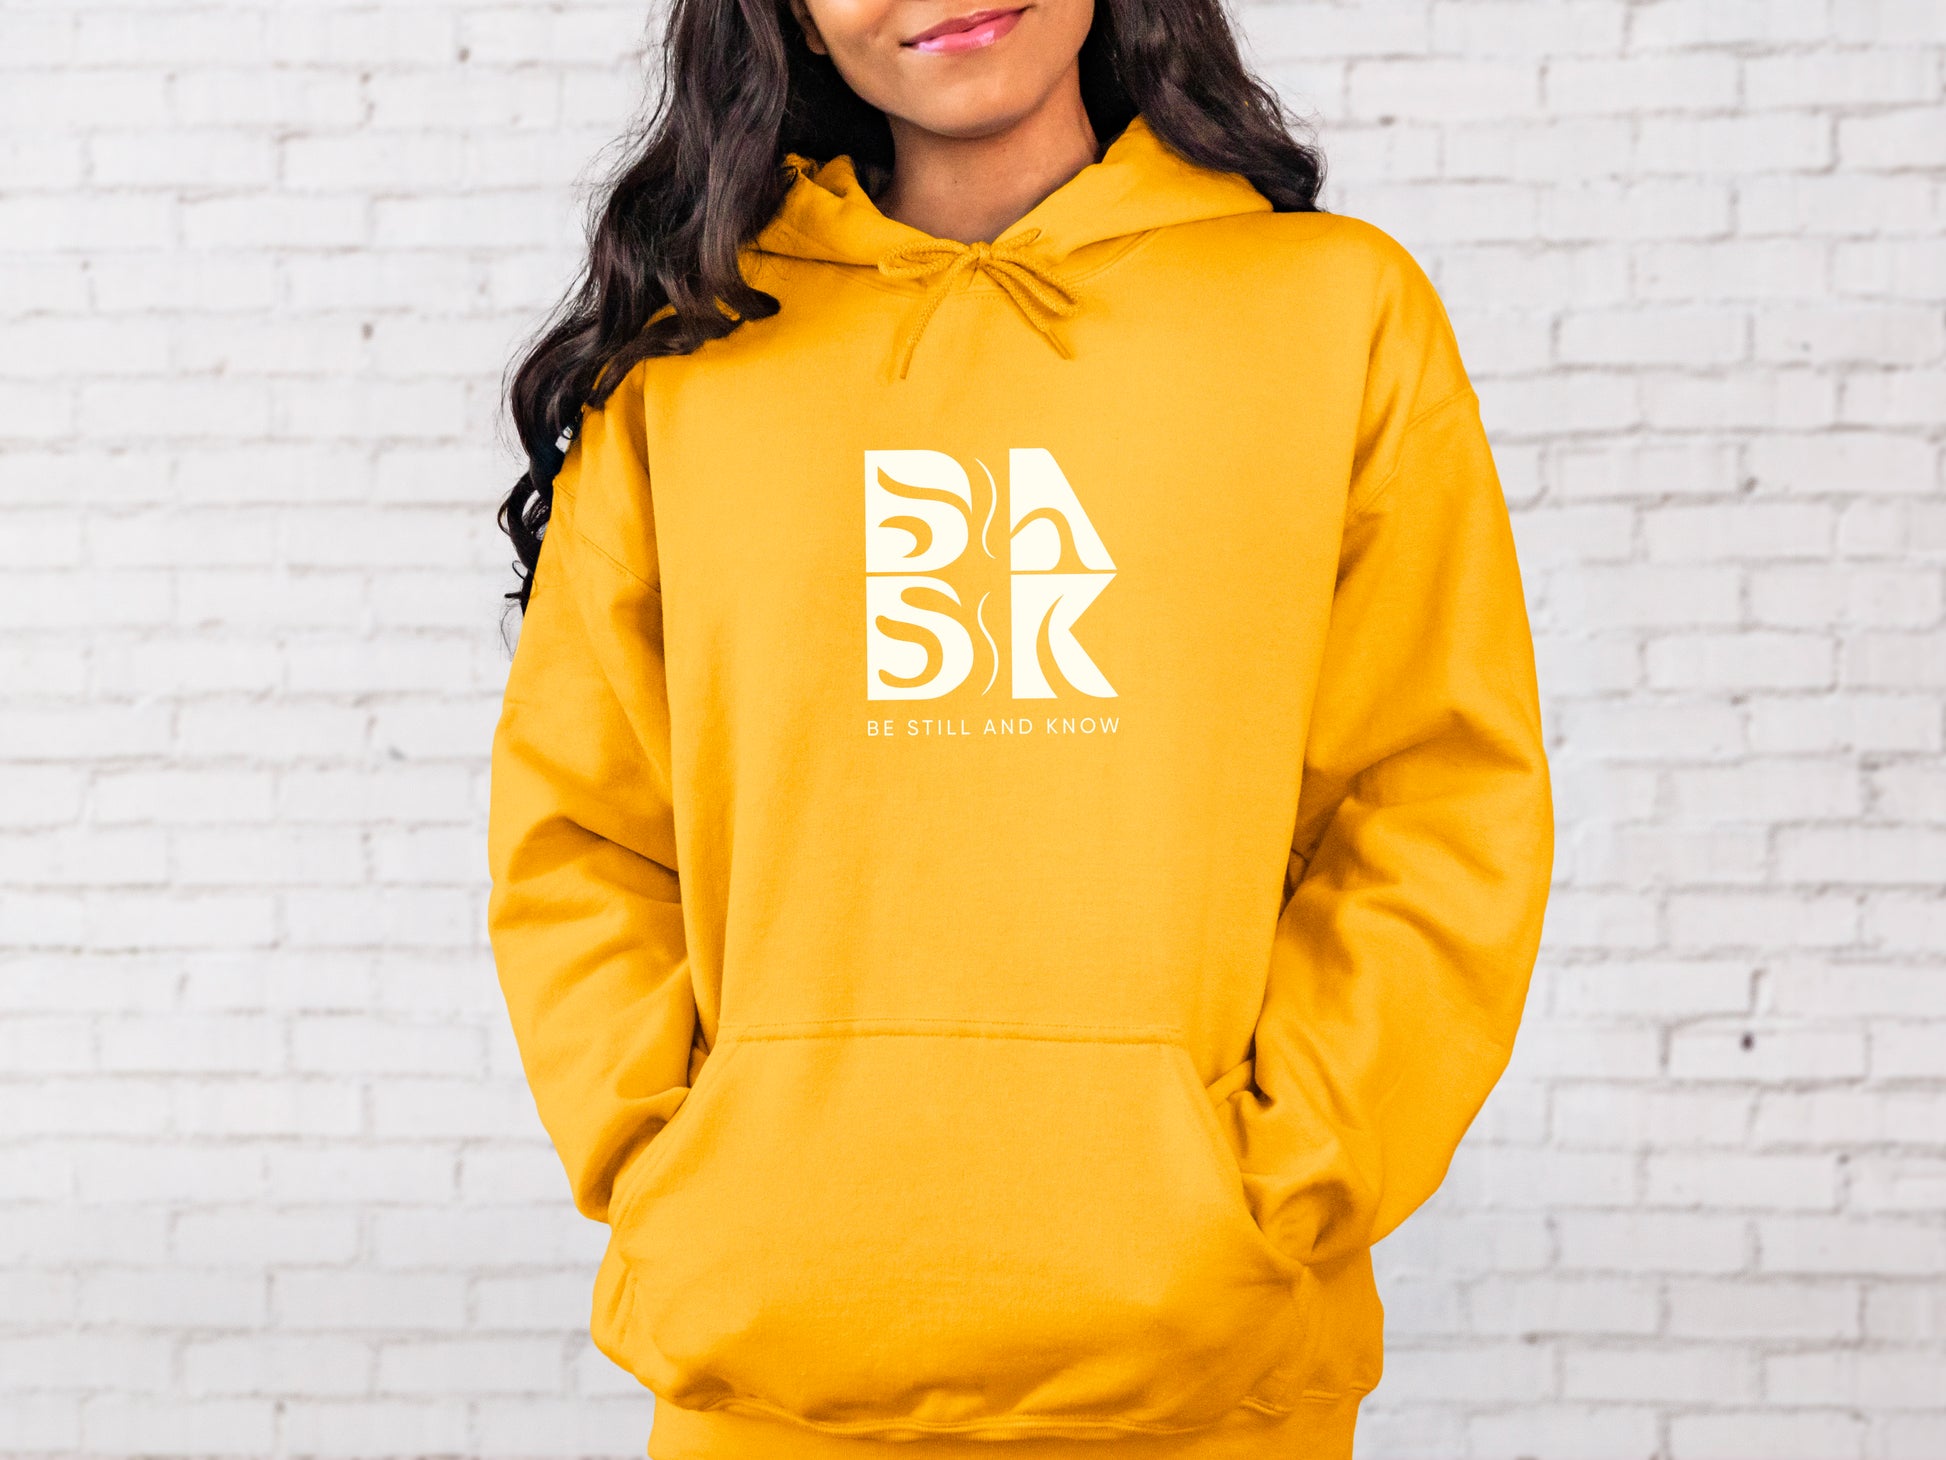 A woman wearing a yellow hoodie with the word Golden Coast In Hoodie In Gold on it, showcasing Be Still and Know logo.